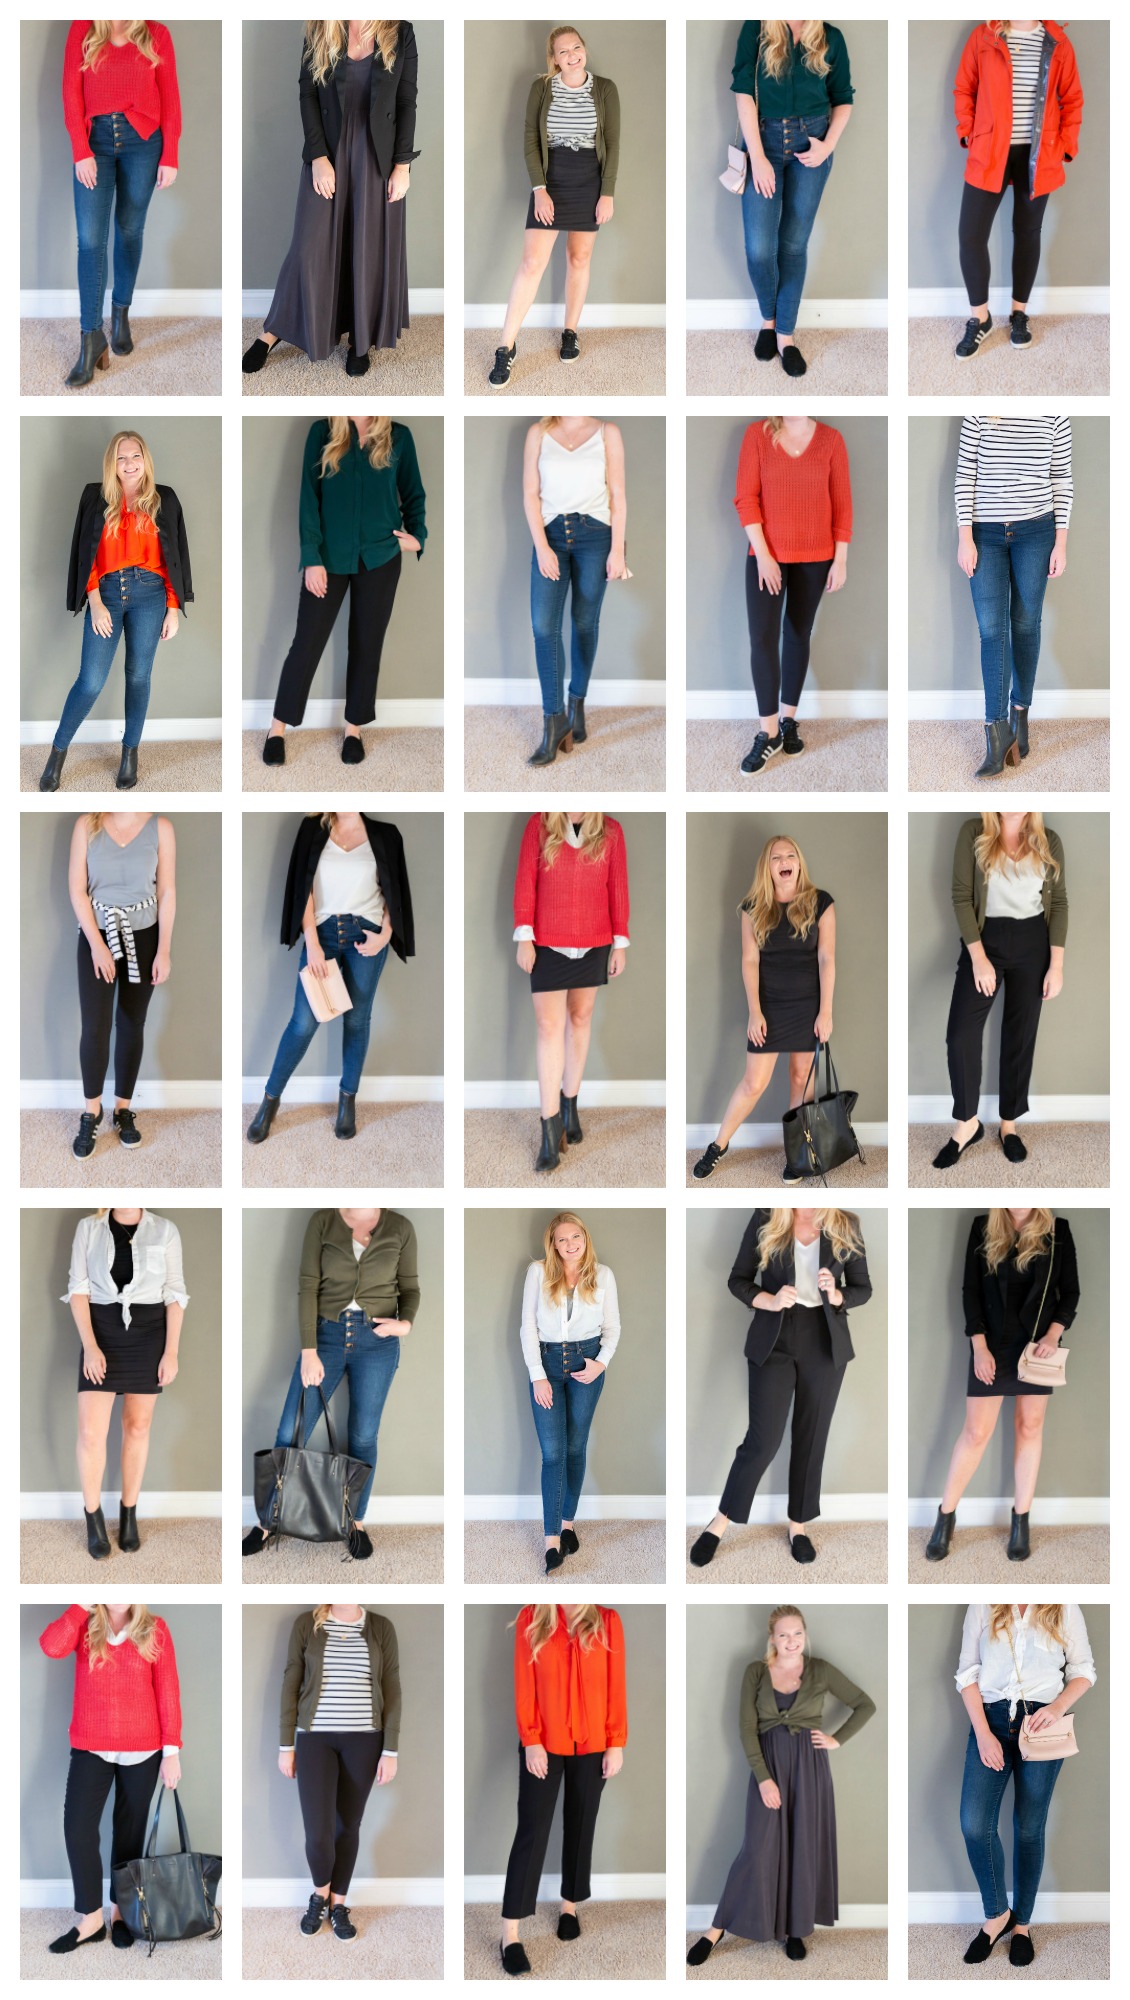 Travel Capsule Wardrobe The Best Packing List 14 Items, 25+ Outfits